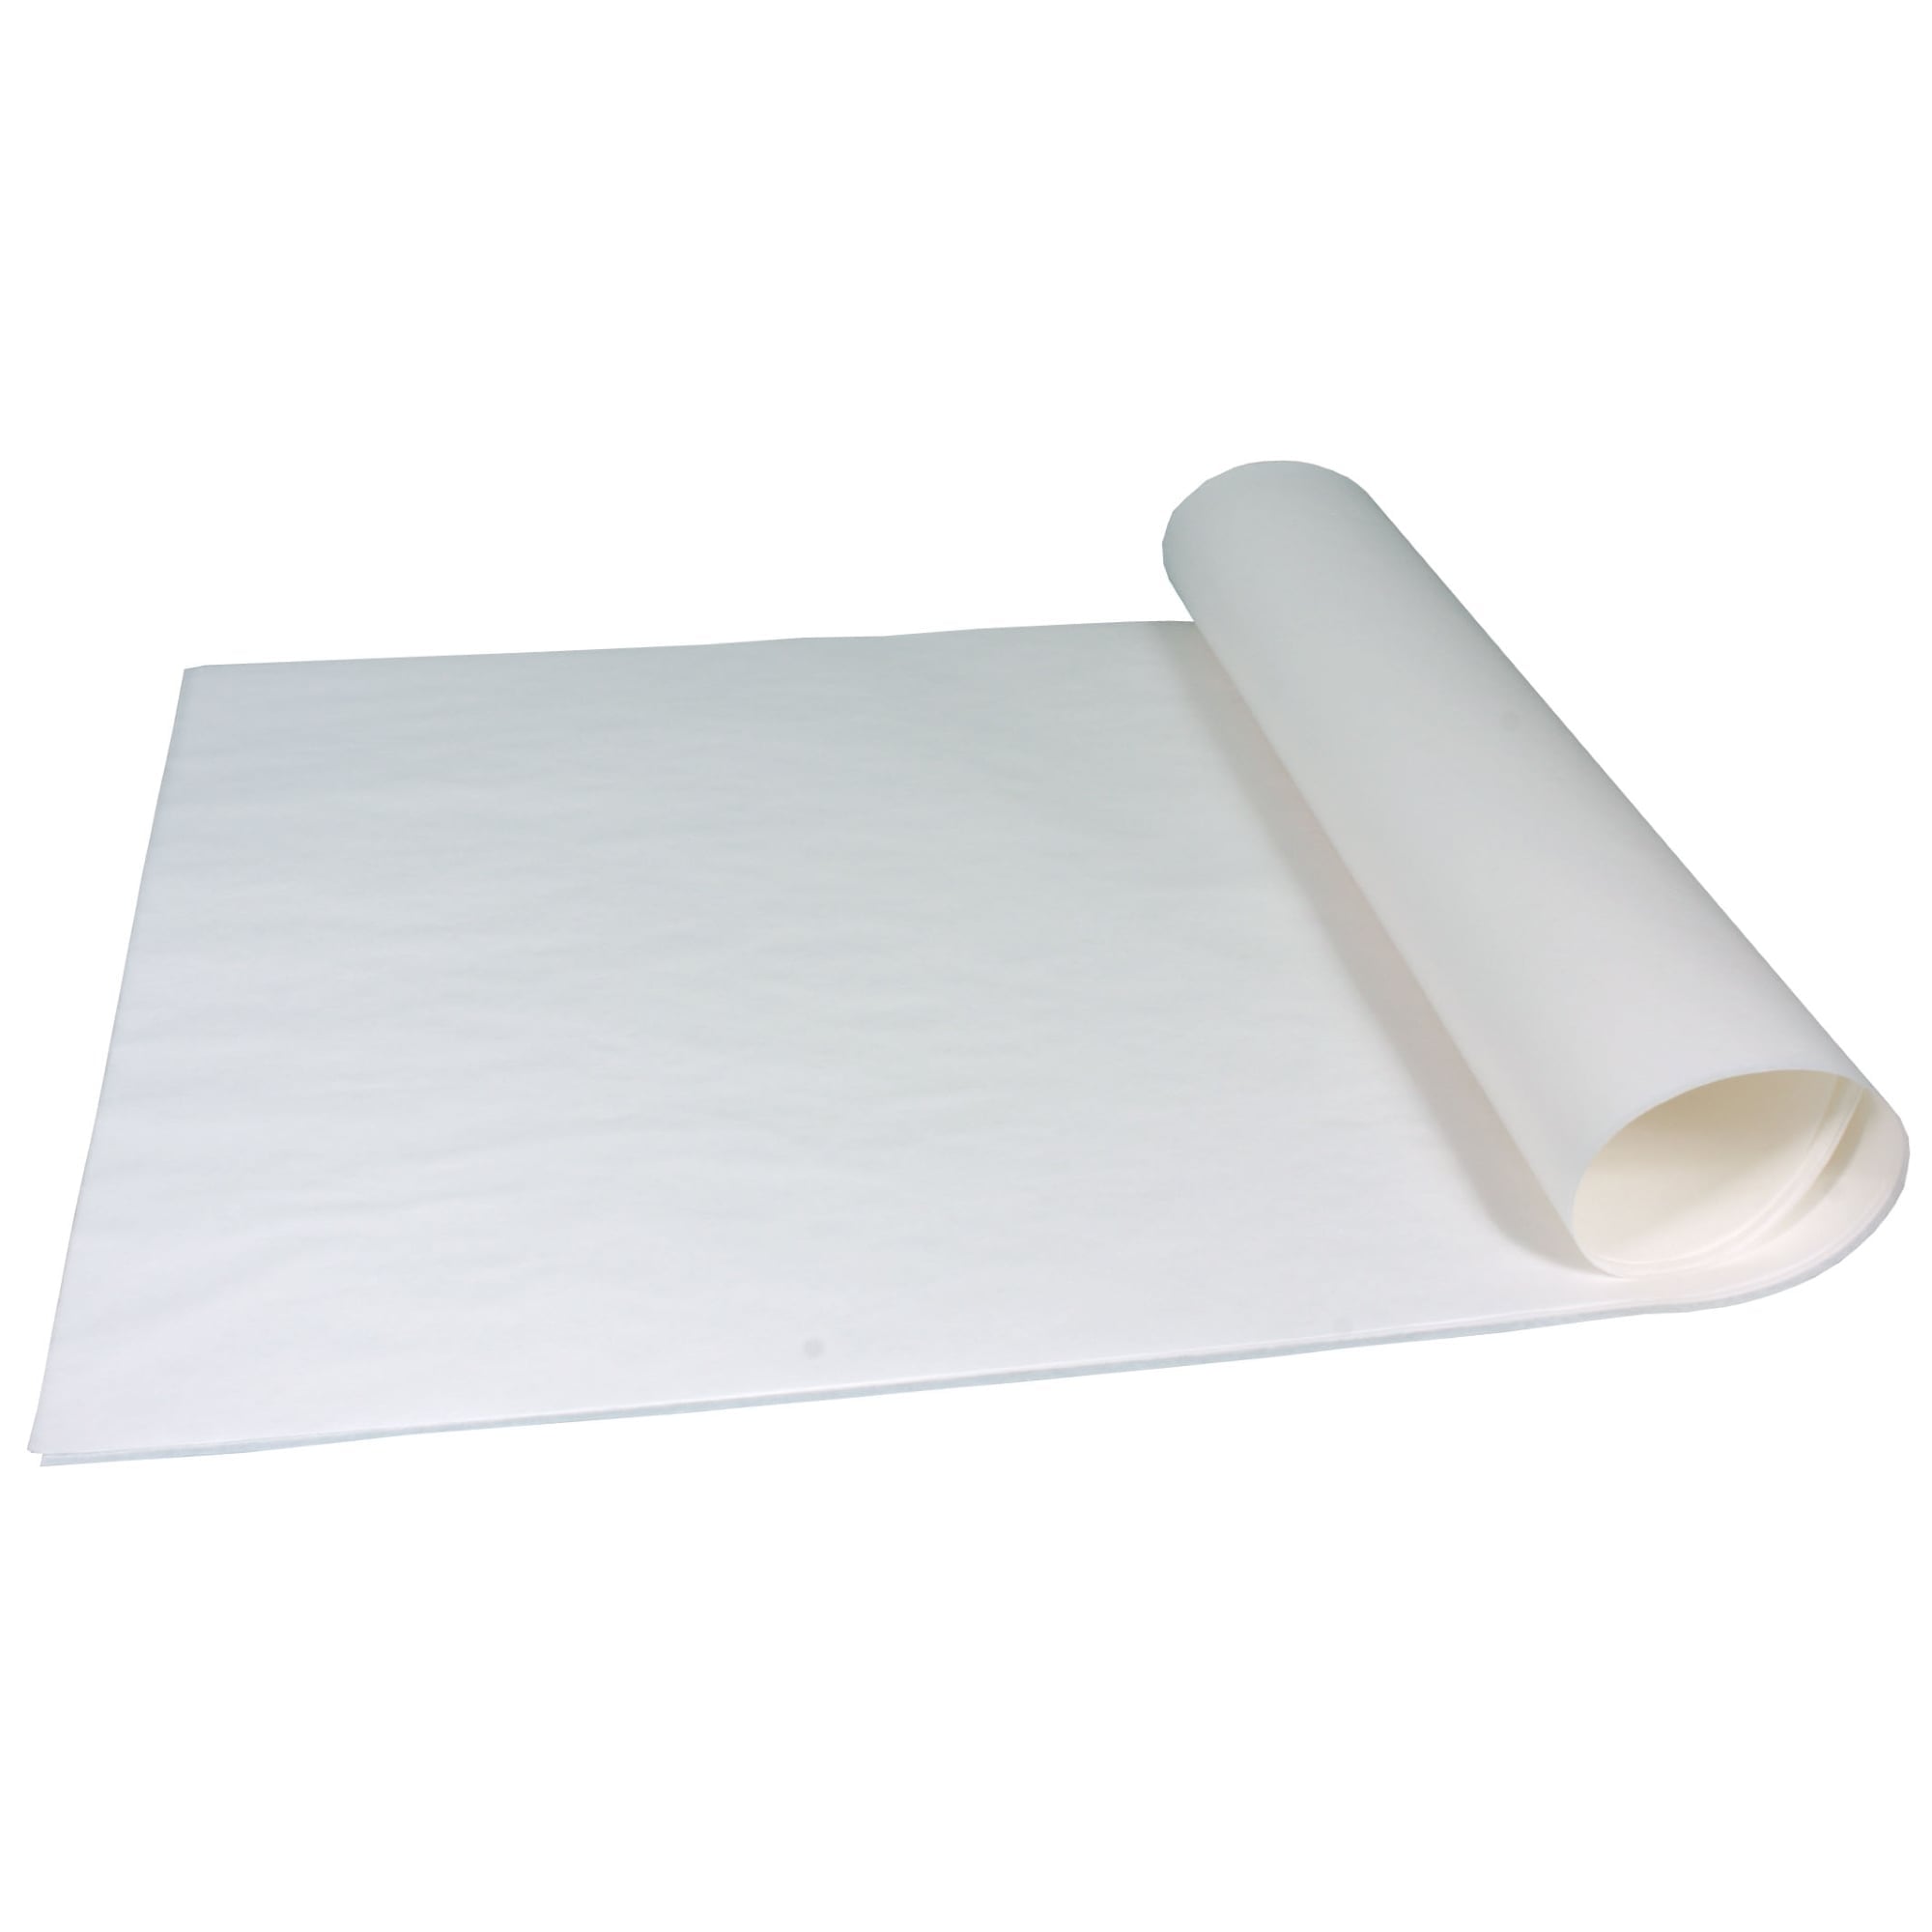 Greaseproof Ream 420mmx330mm Half